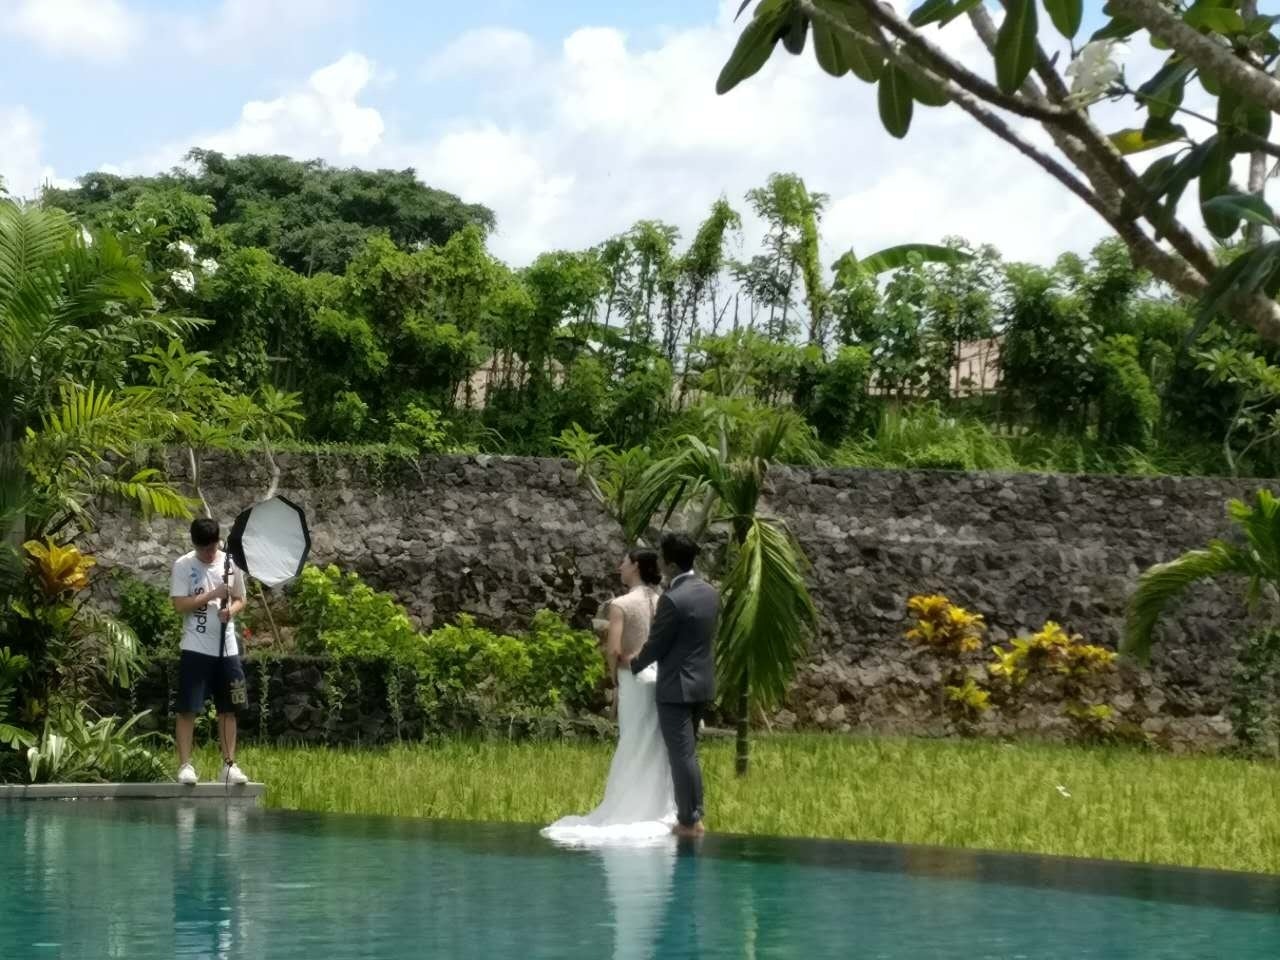 A couple gets their destination wedding photos taken in Bali, an increasingly popular place for Chinese consumers to tie the knot. (Photo by Jessica Rapp)